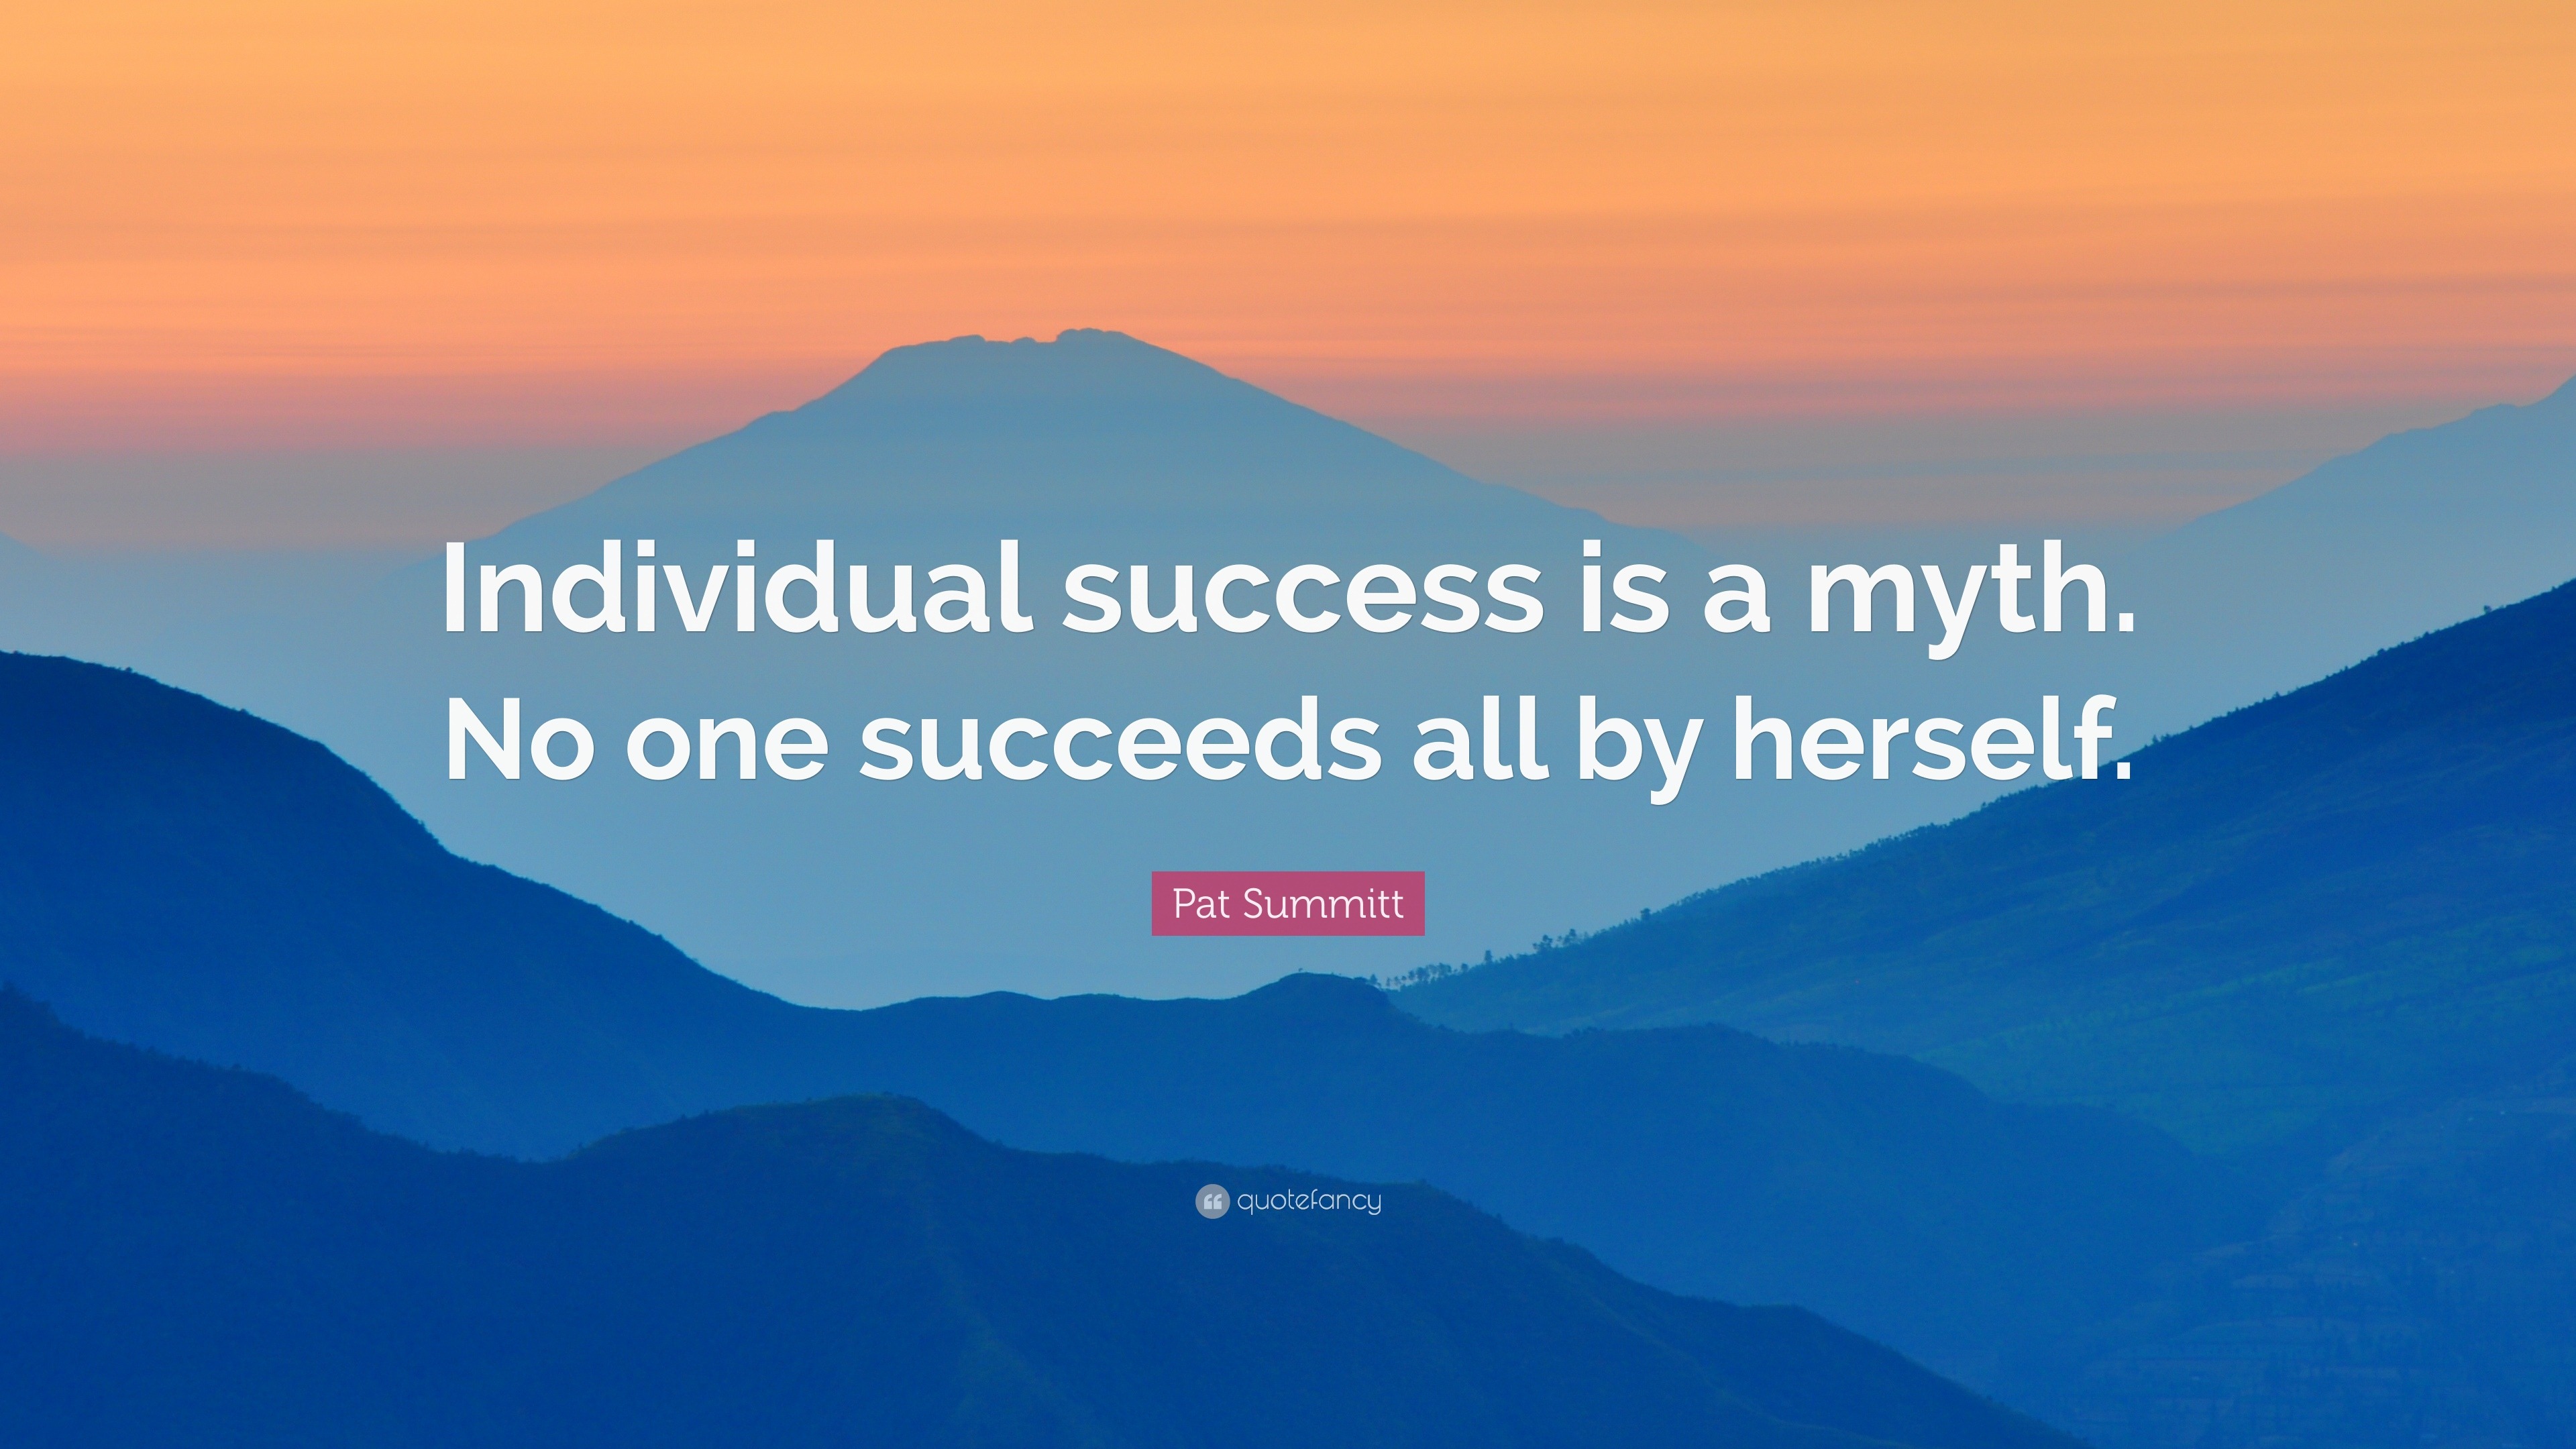 Pat Summitt Quote: “Individual success is a myth. No one succeeds all